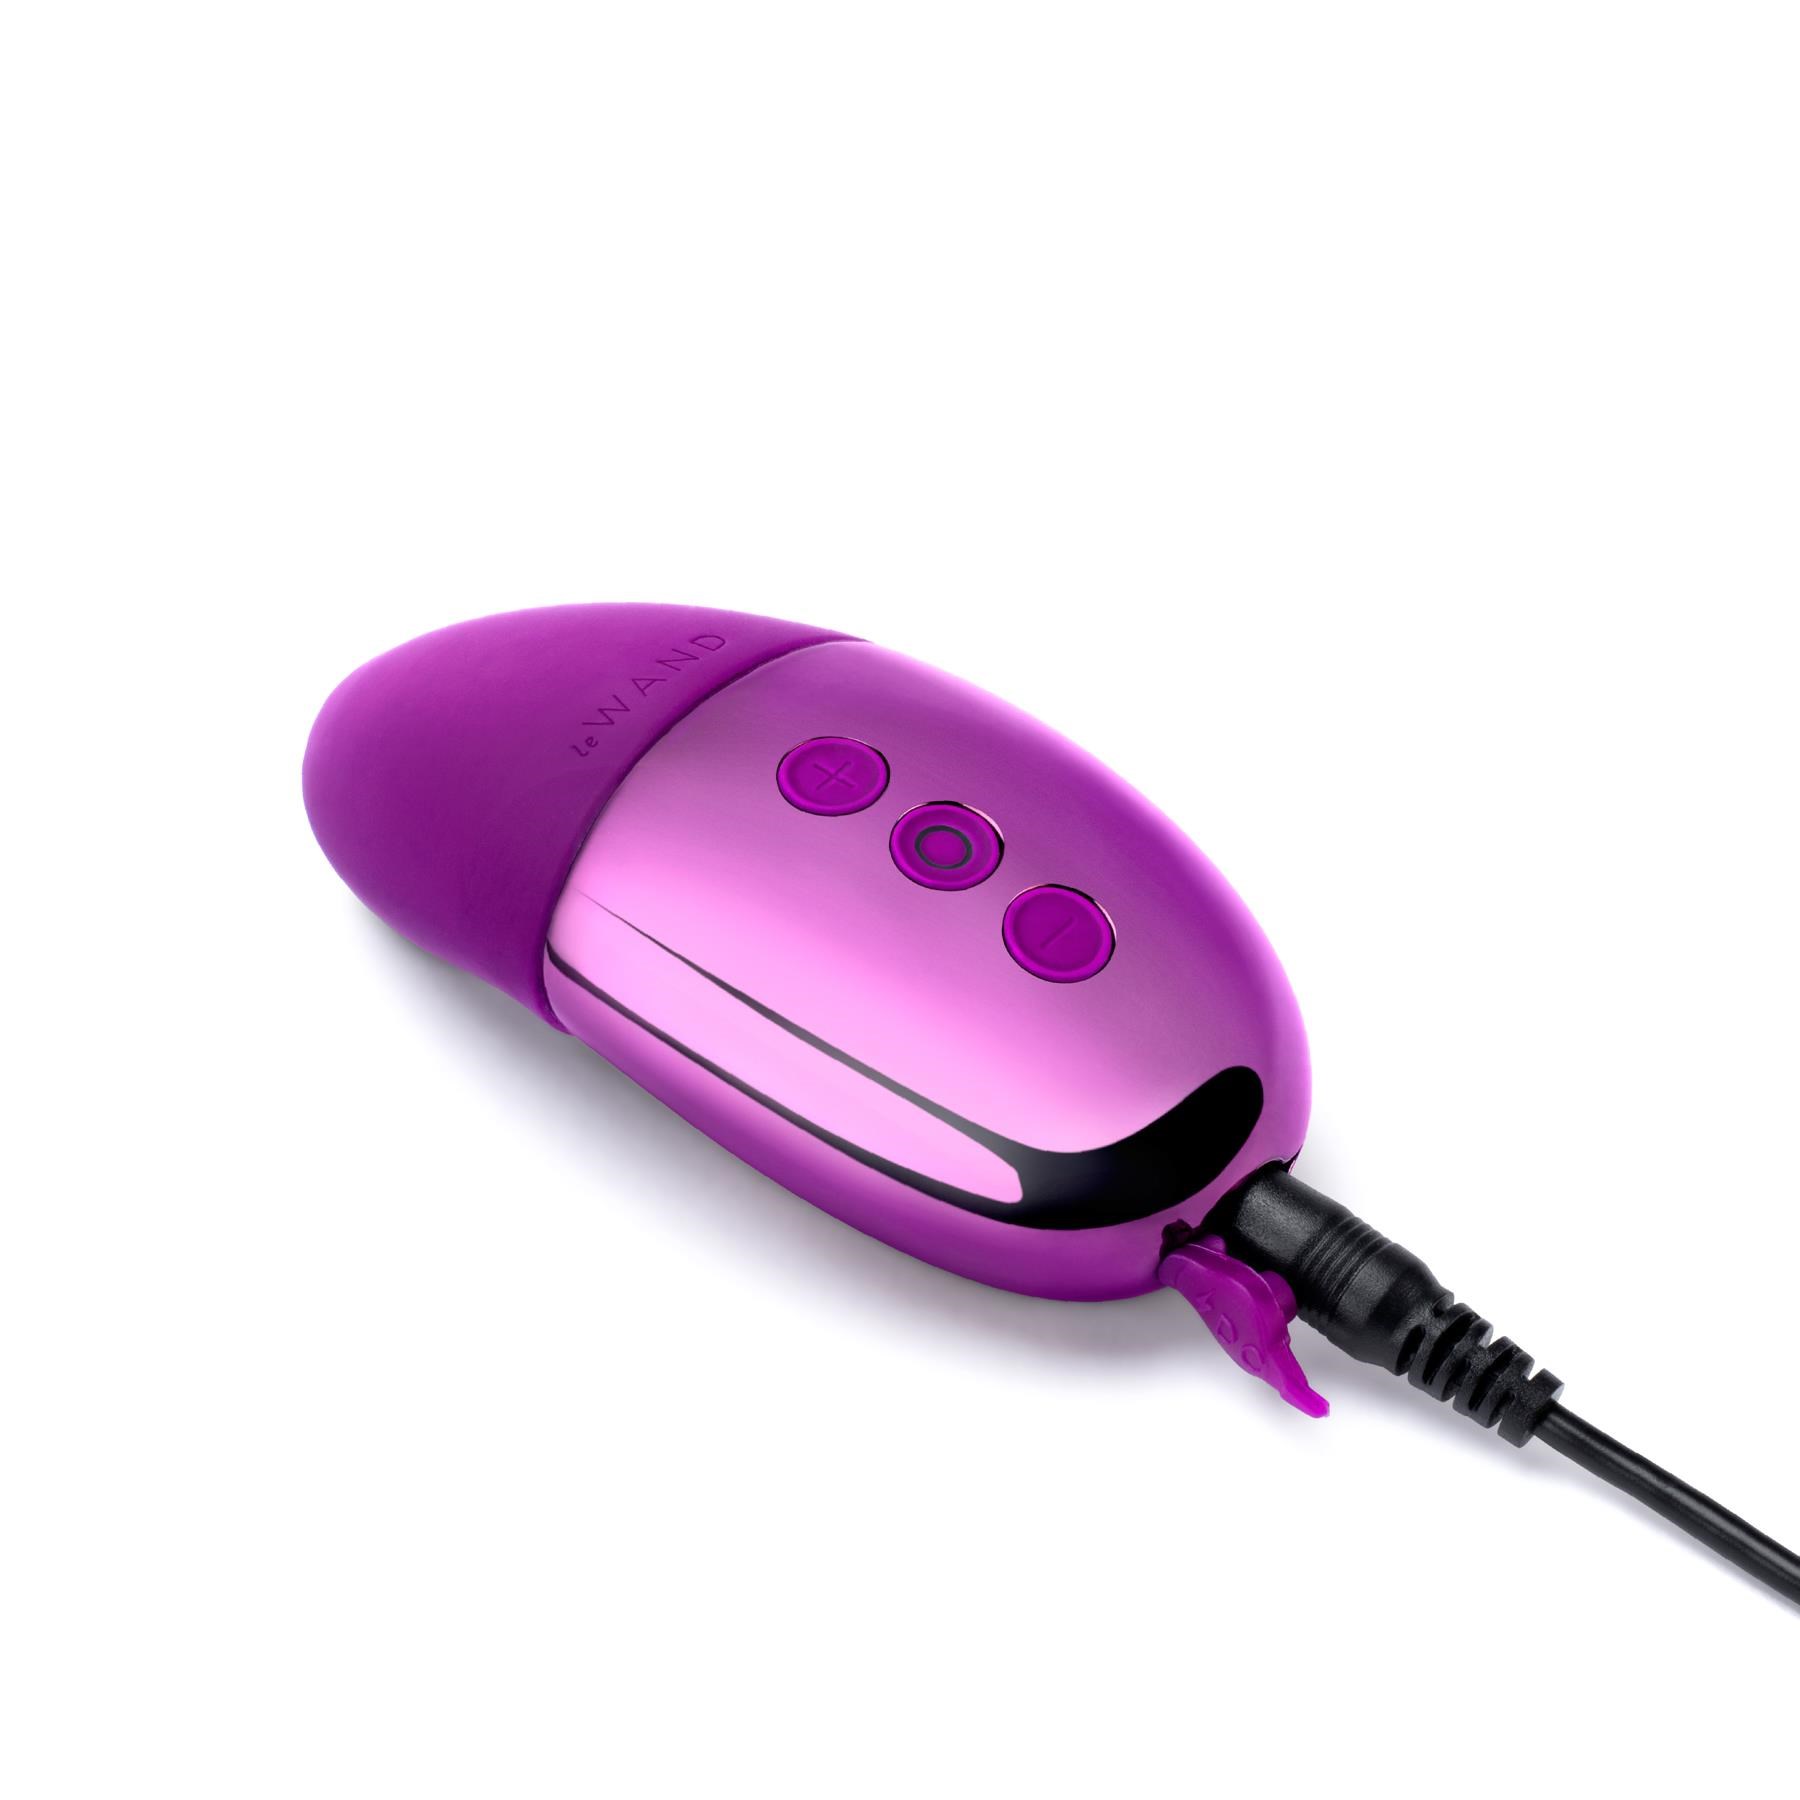 Le Wand Chrome Point Layon Vibrator- Showing Where Charging Cable is Placed